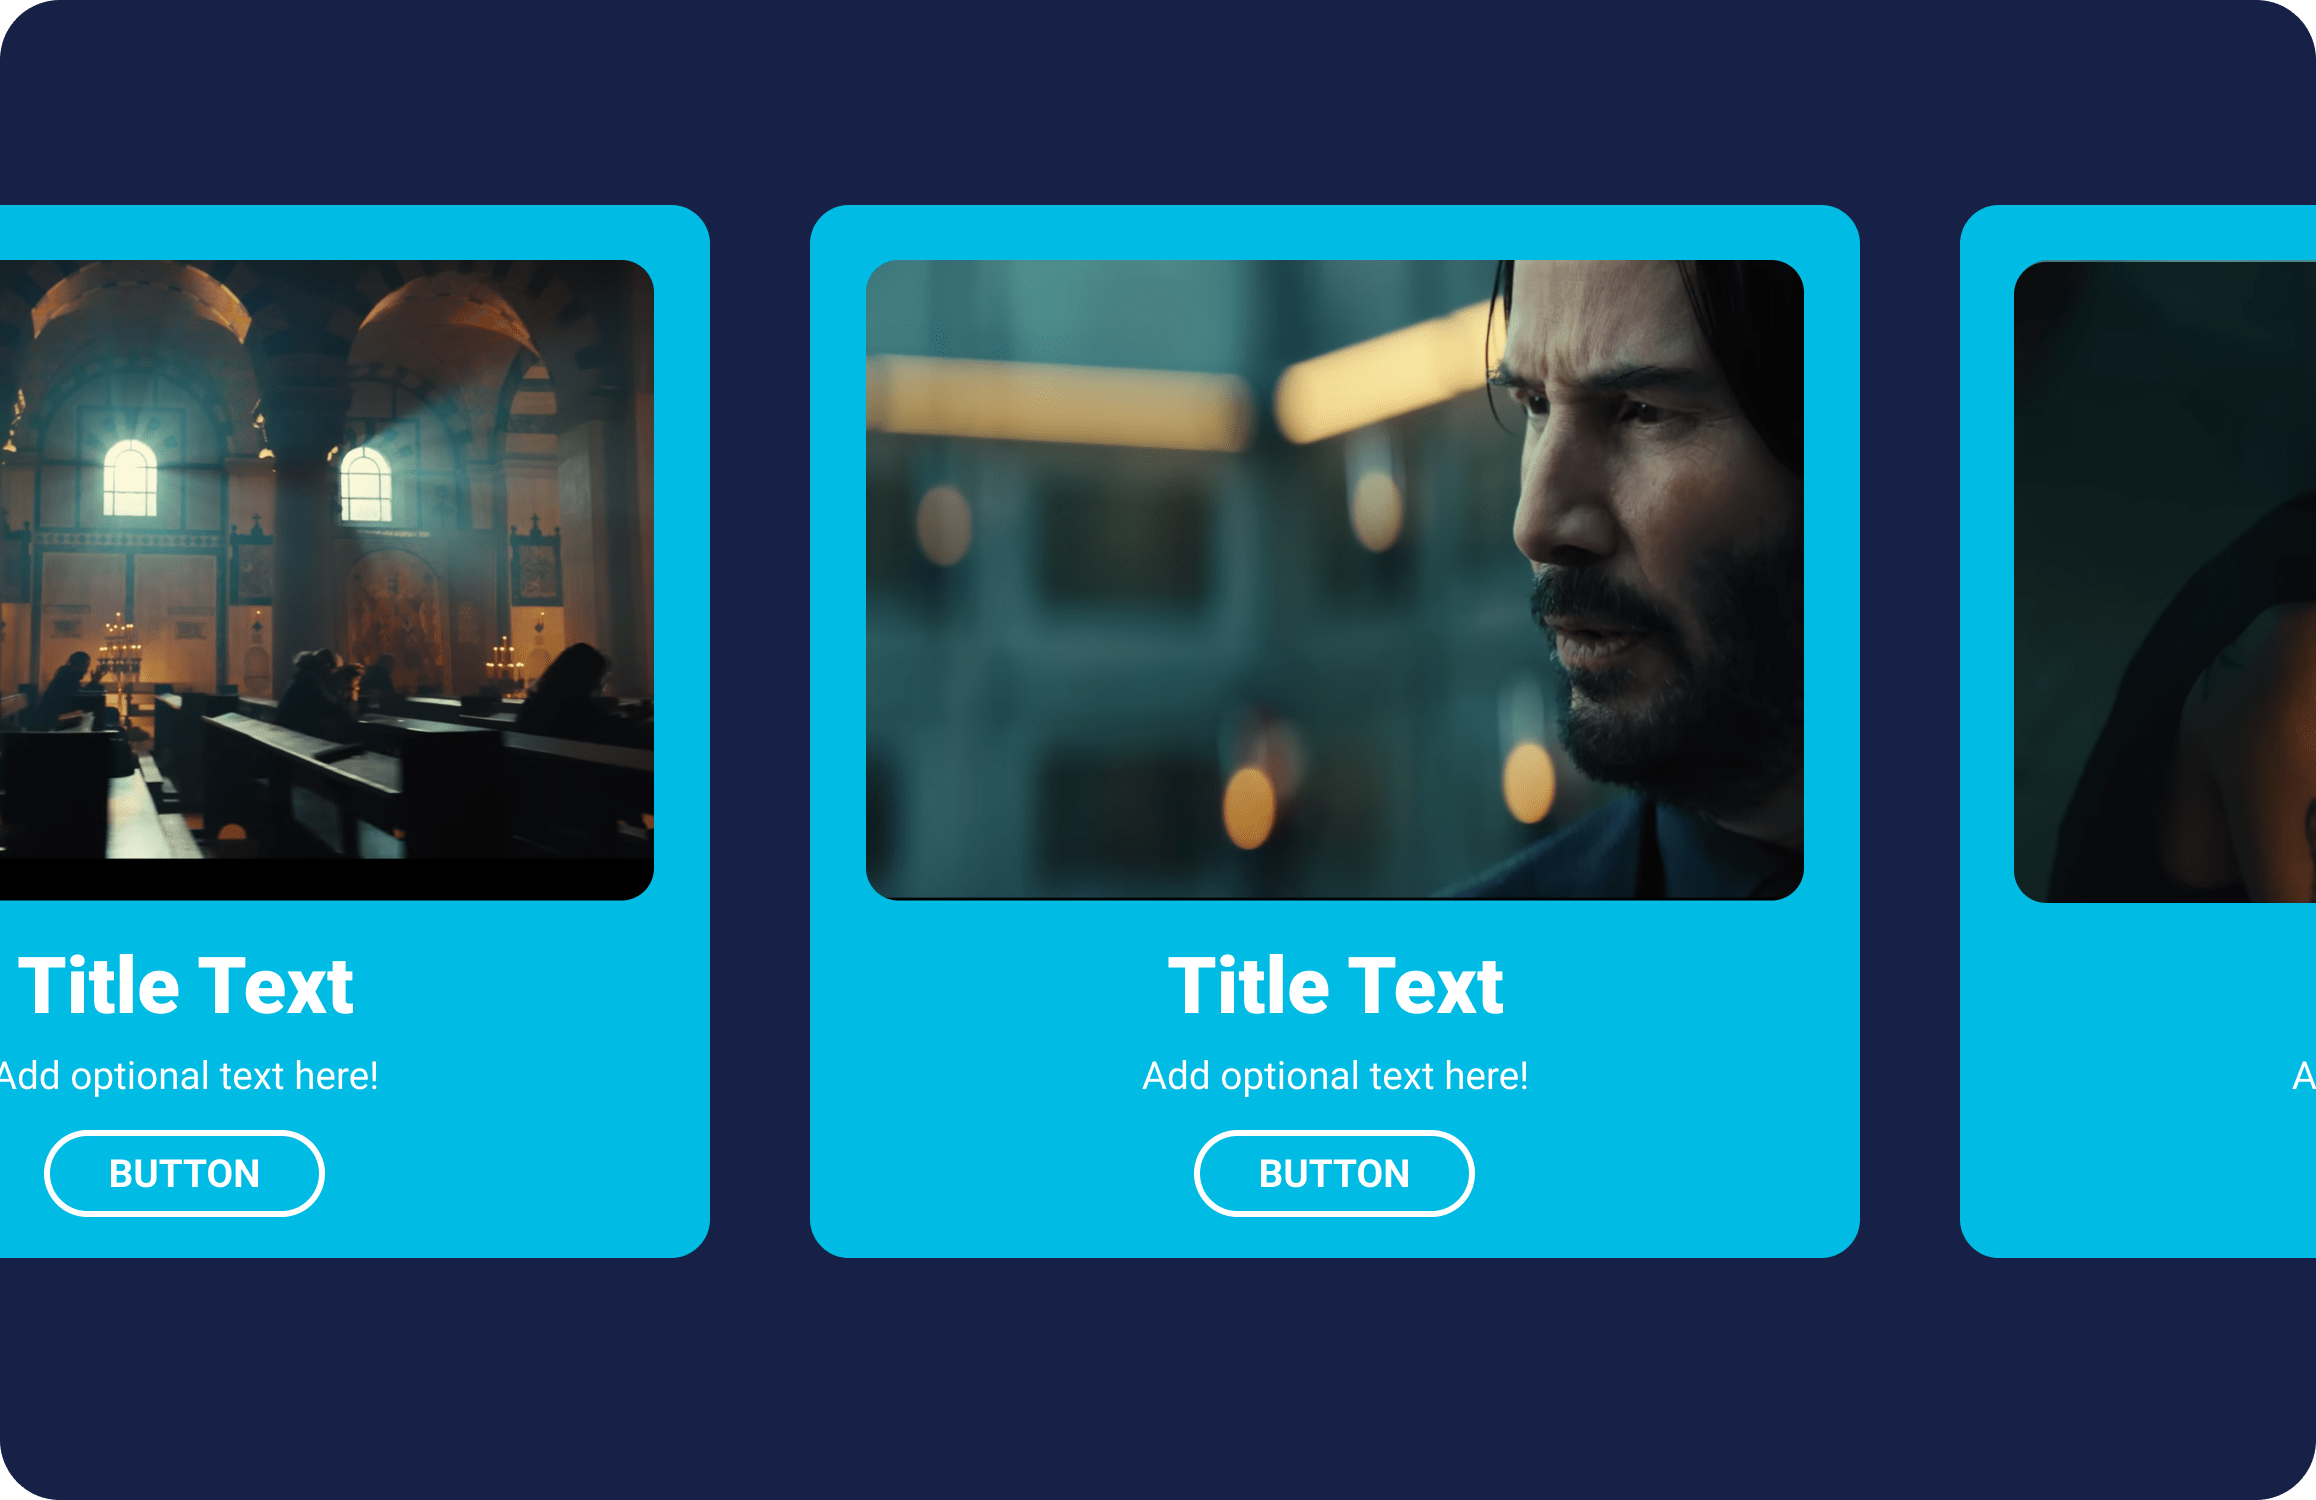 Customize your cinema website to reflect your cinema's brand